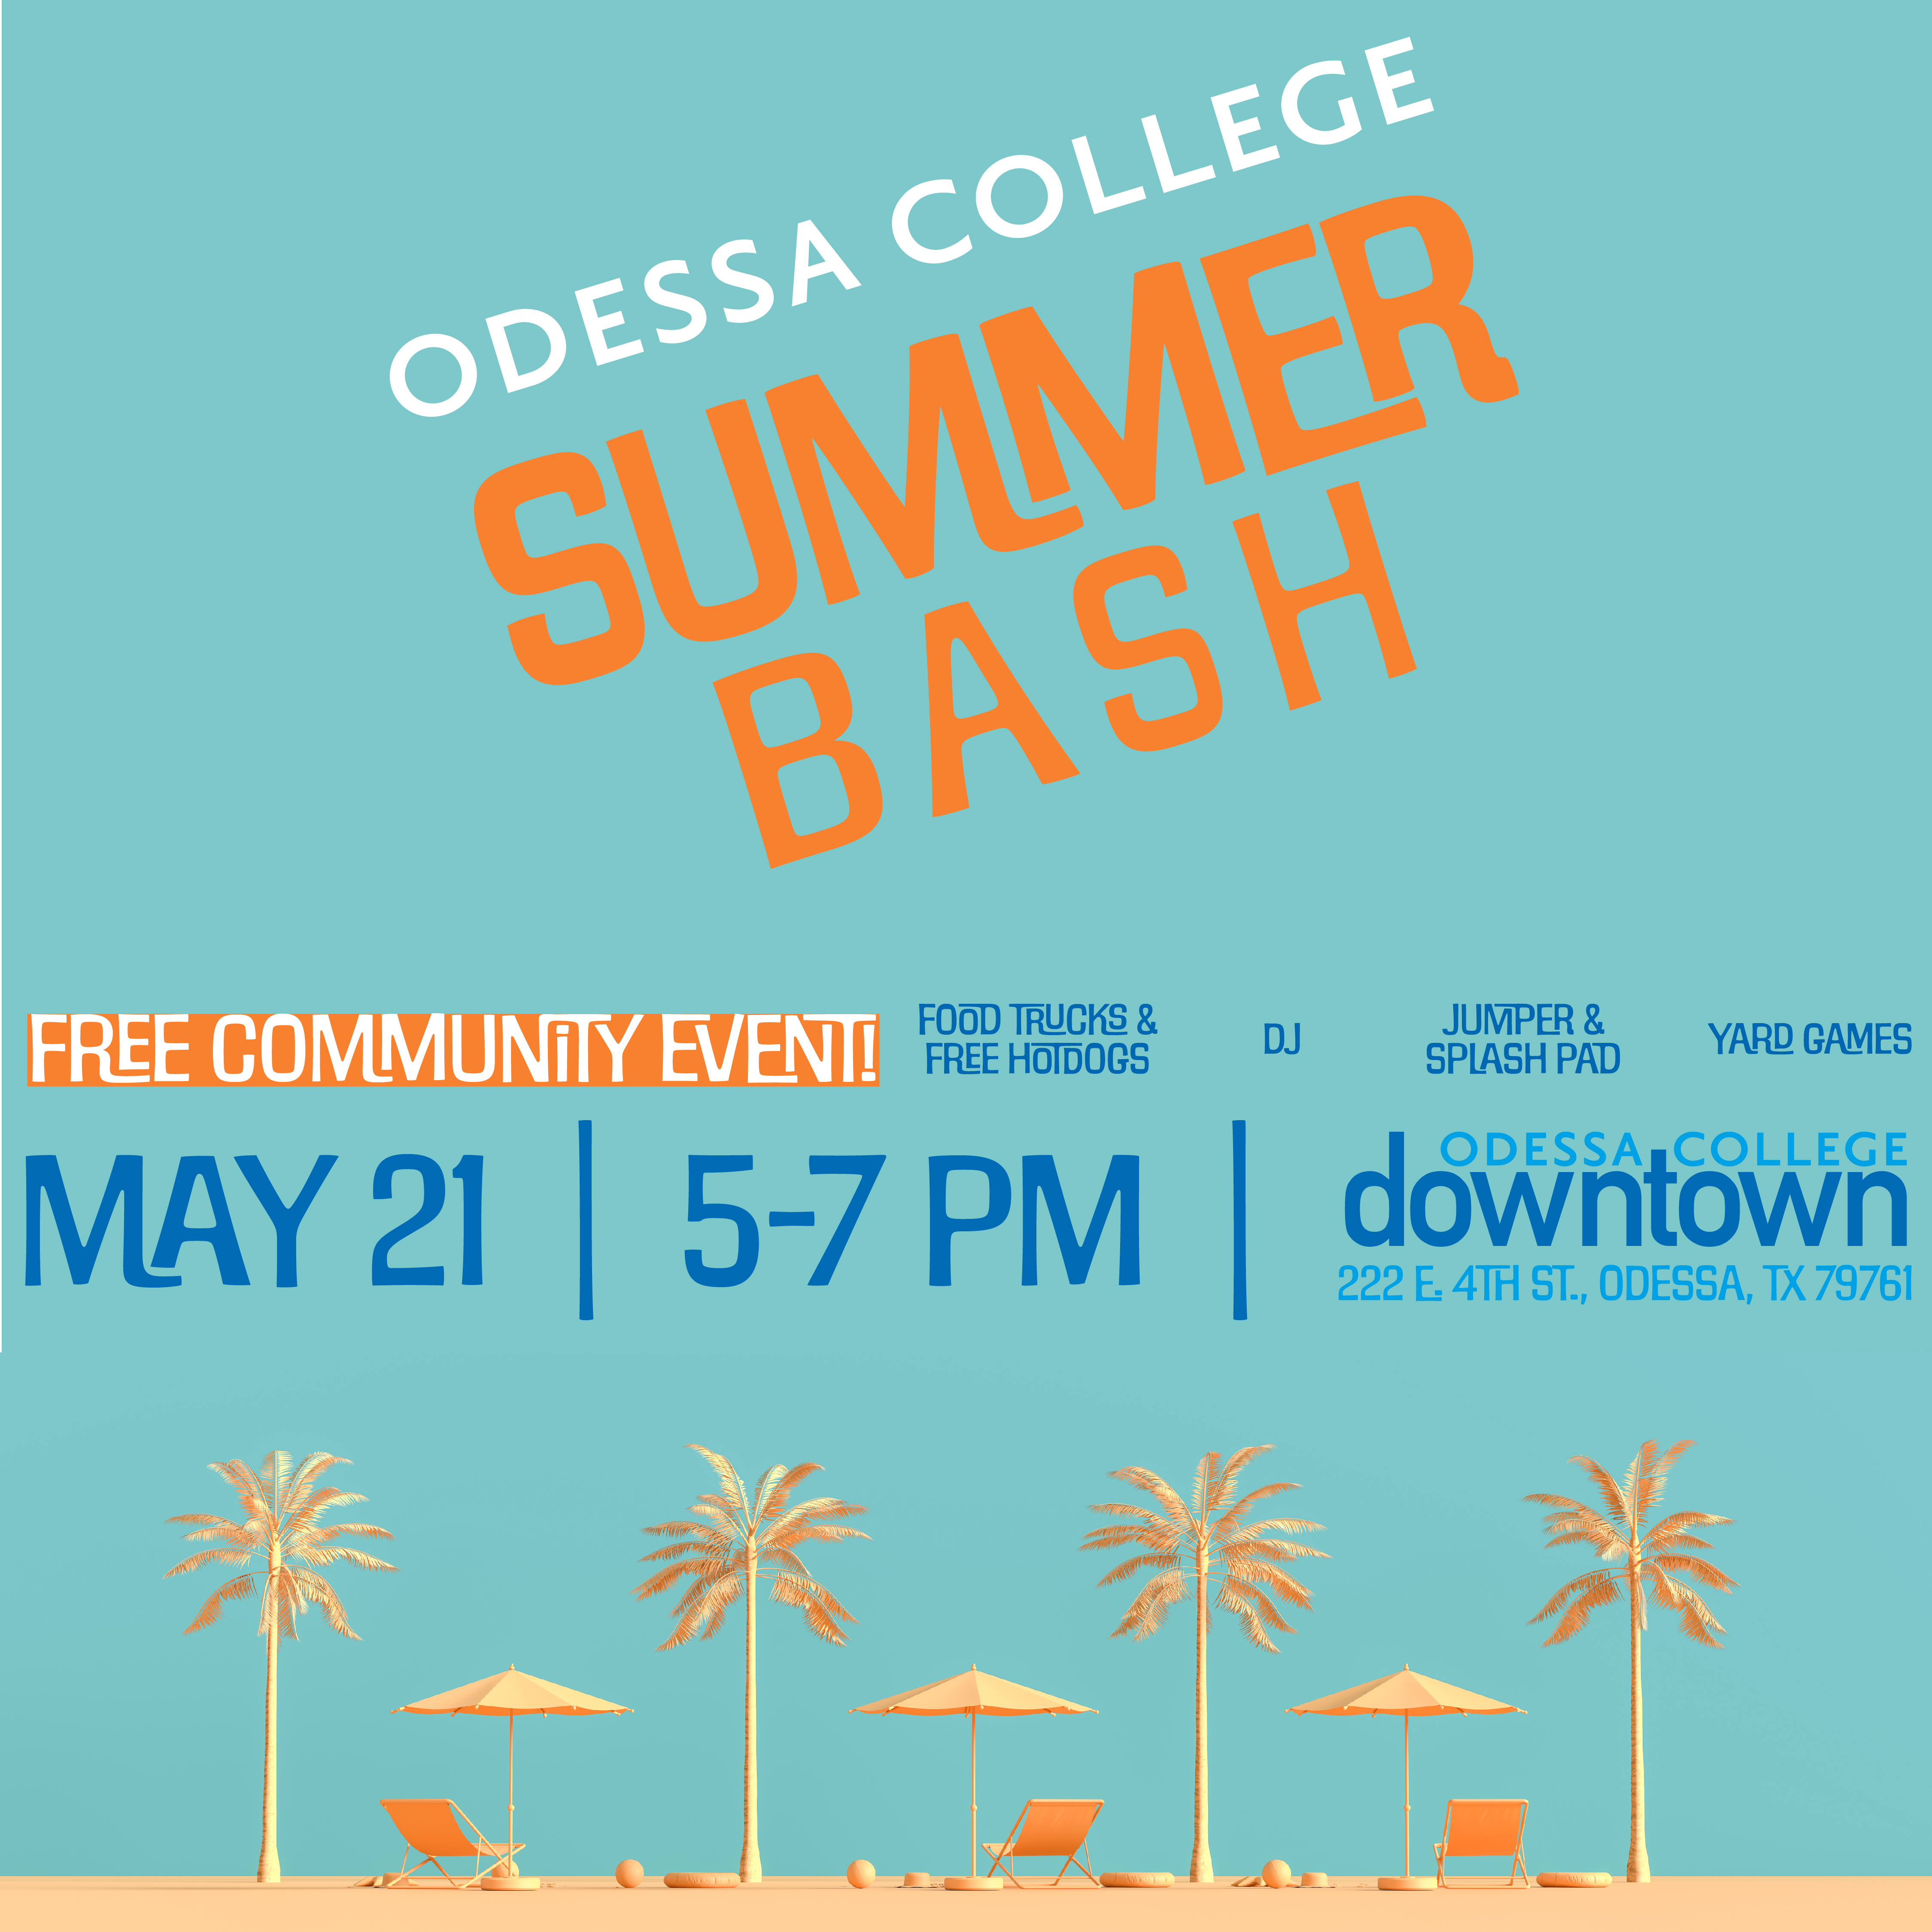 Odessa College Summer Bash event free to the community